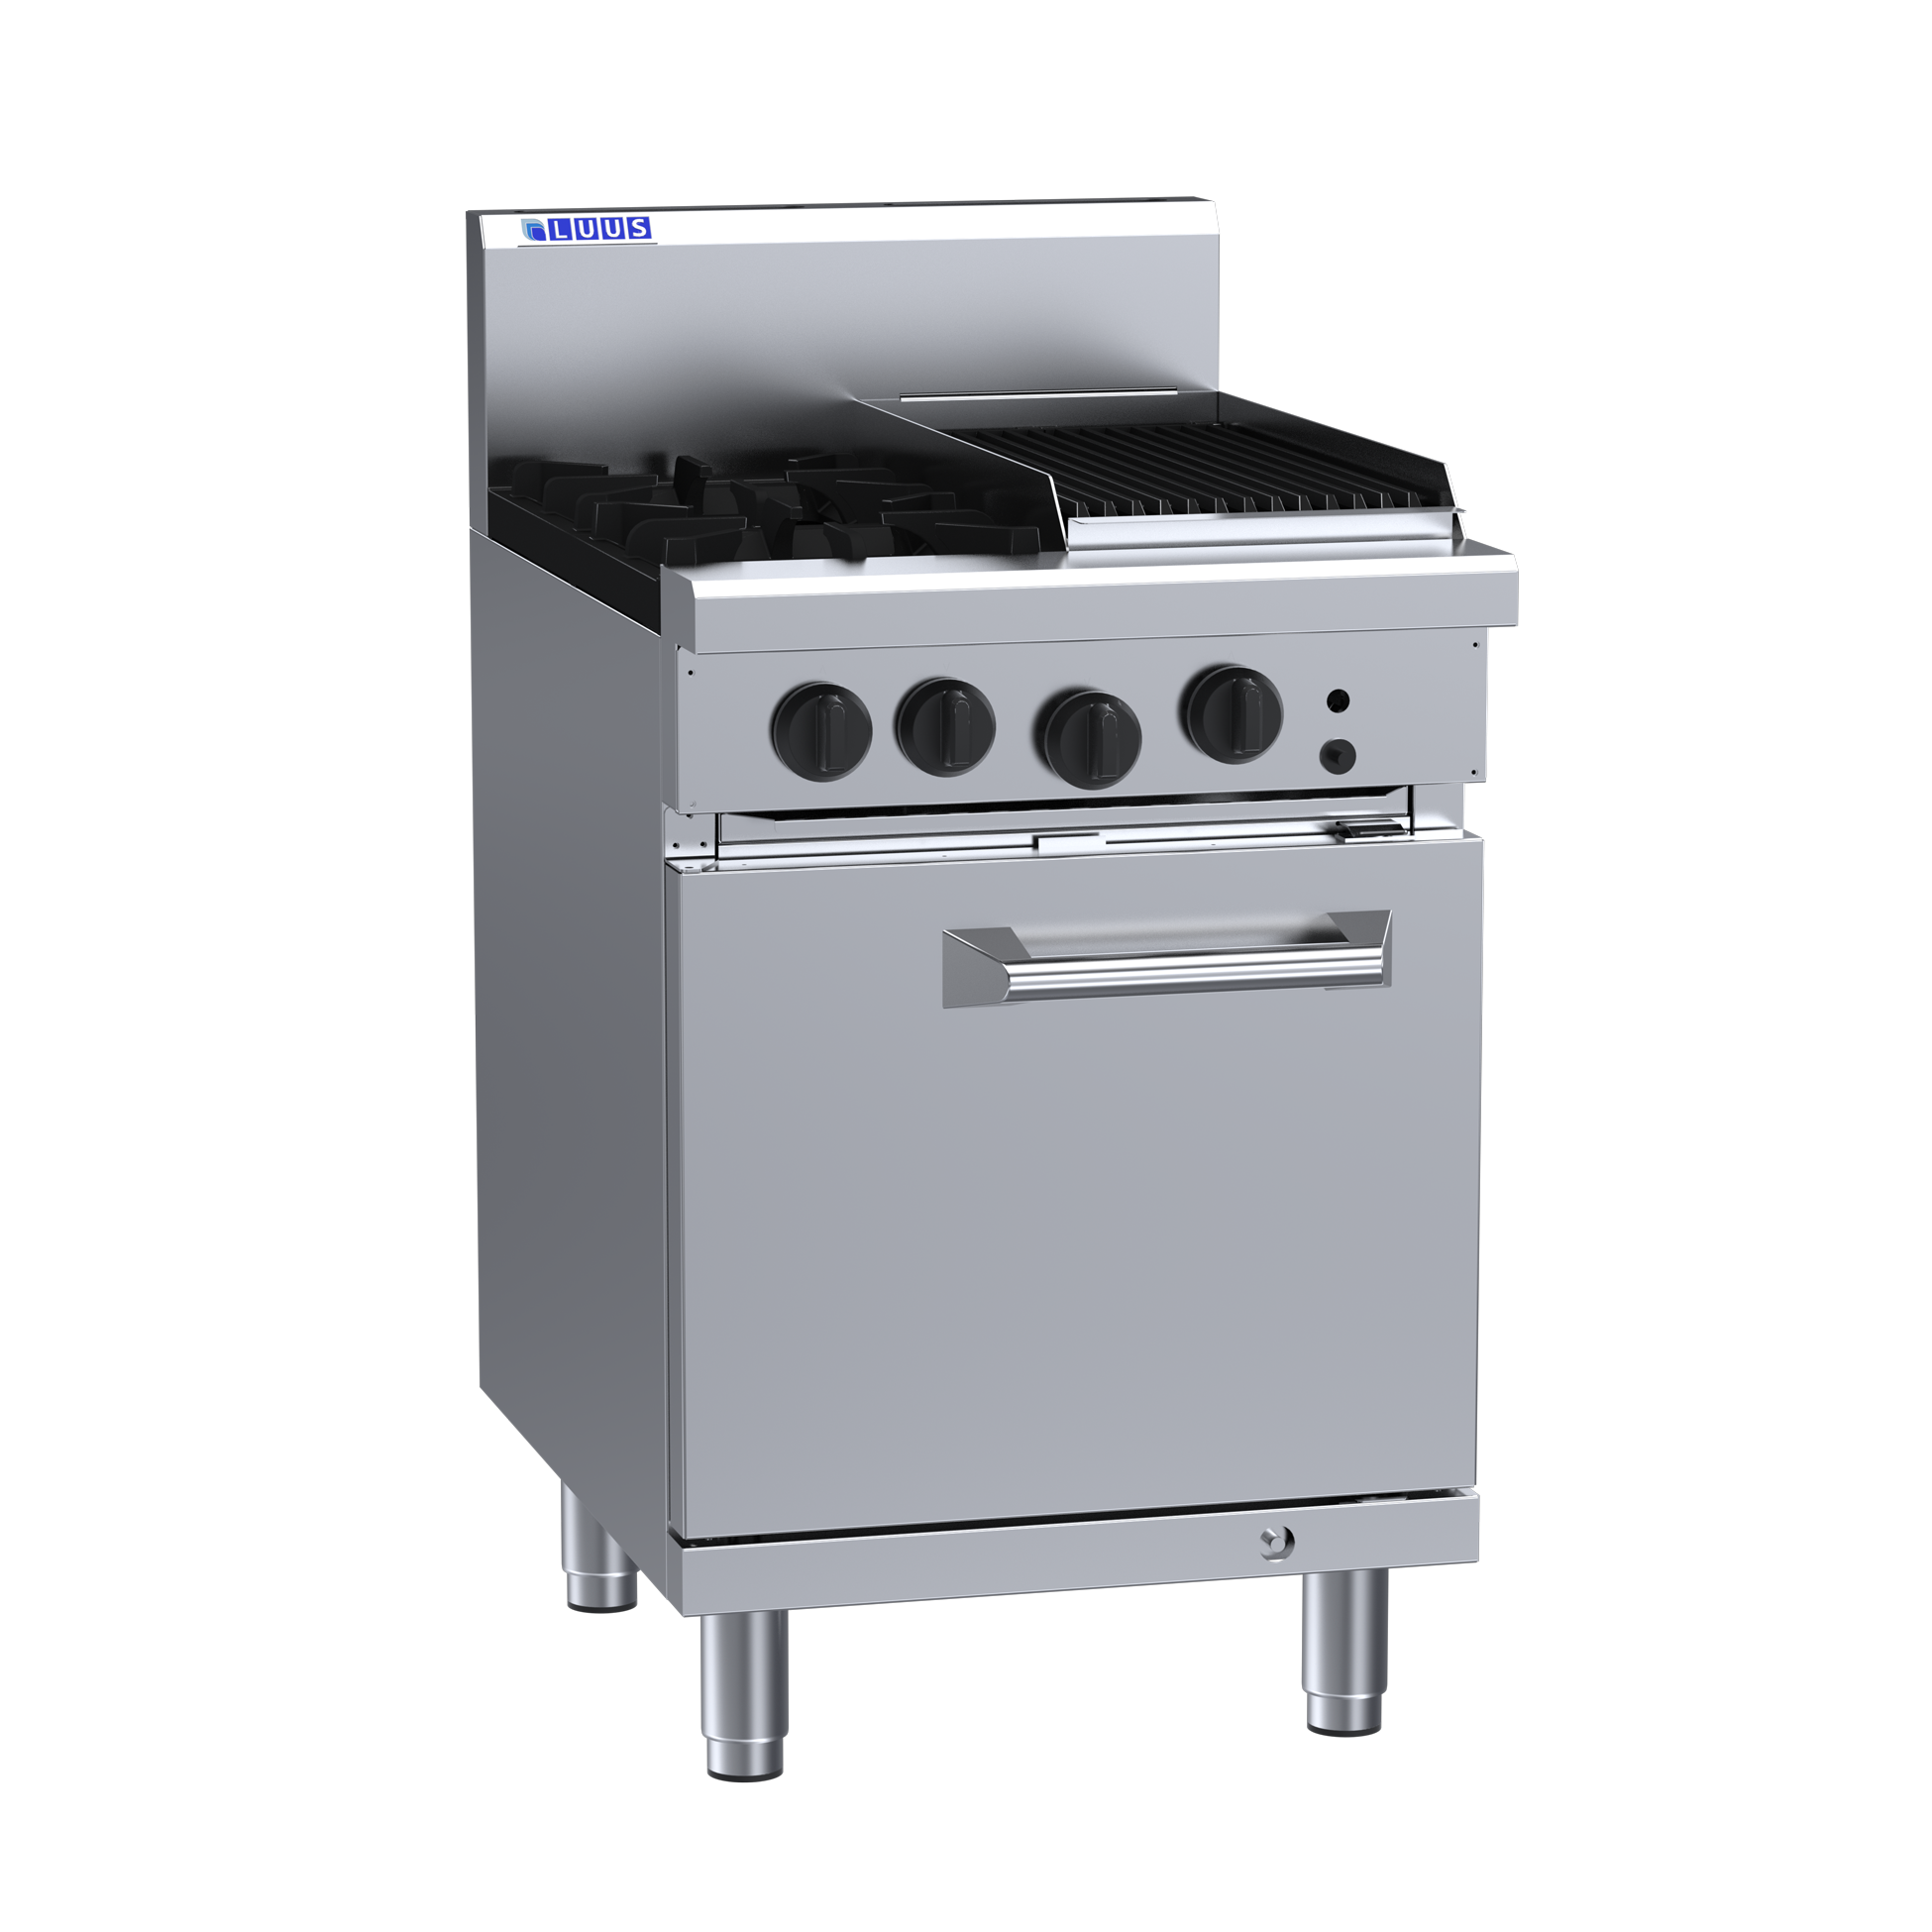 Luus Commercial Oven Burner Mm Chargrill Rs B C Kitchen Setup